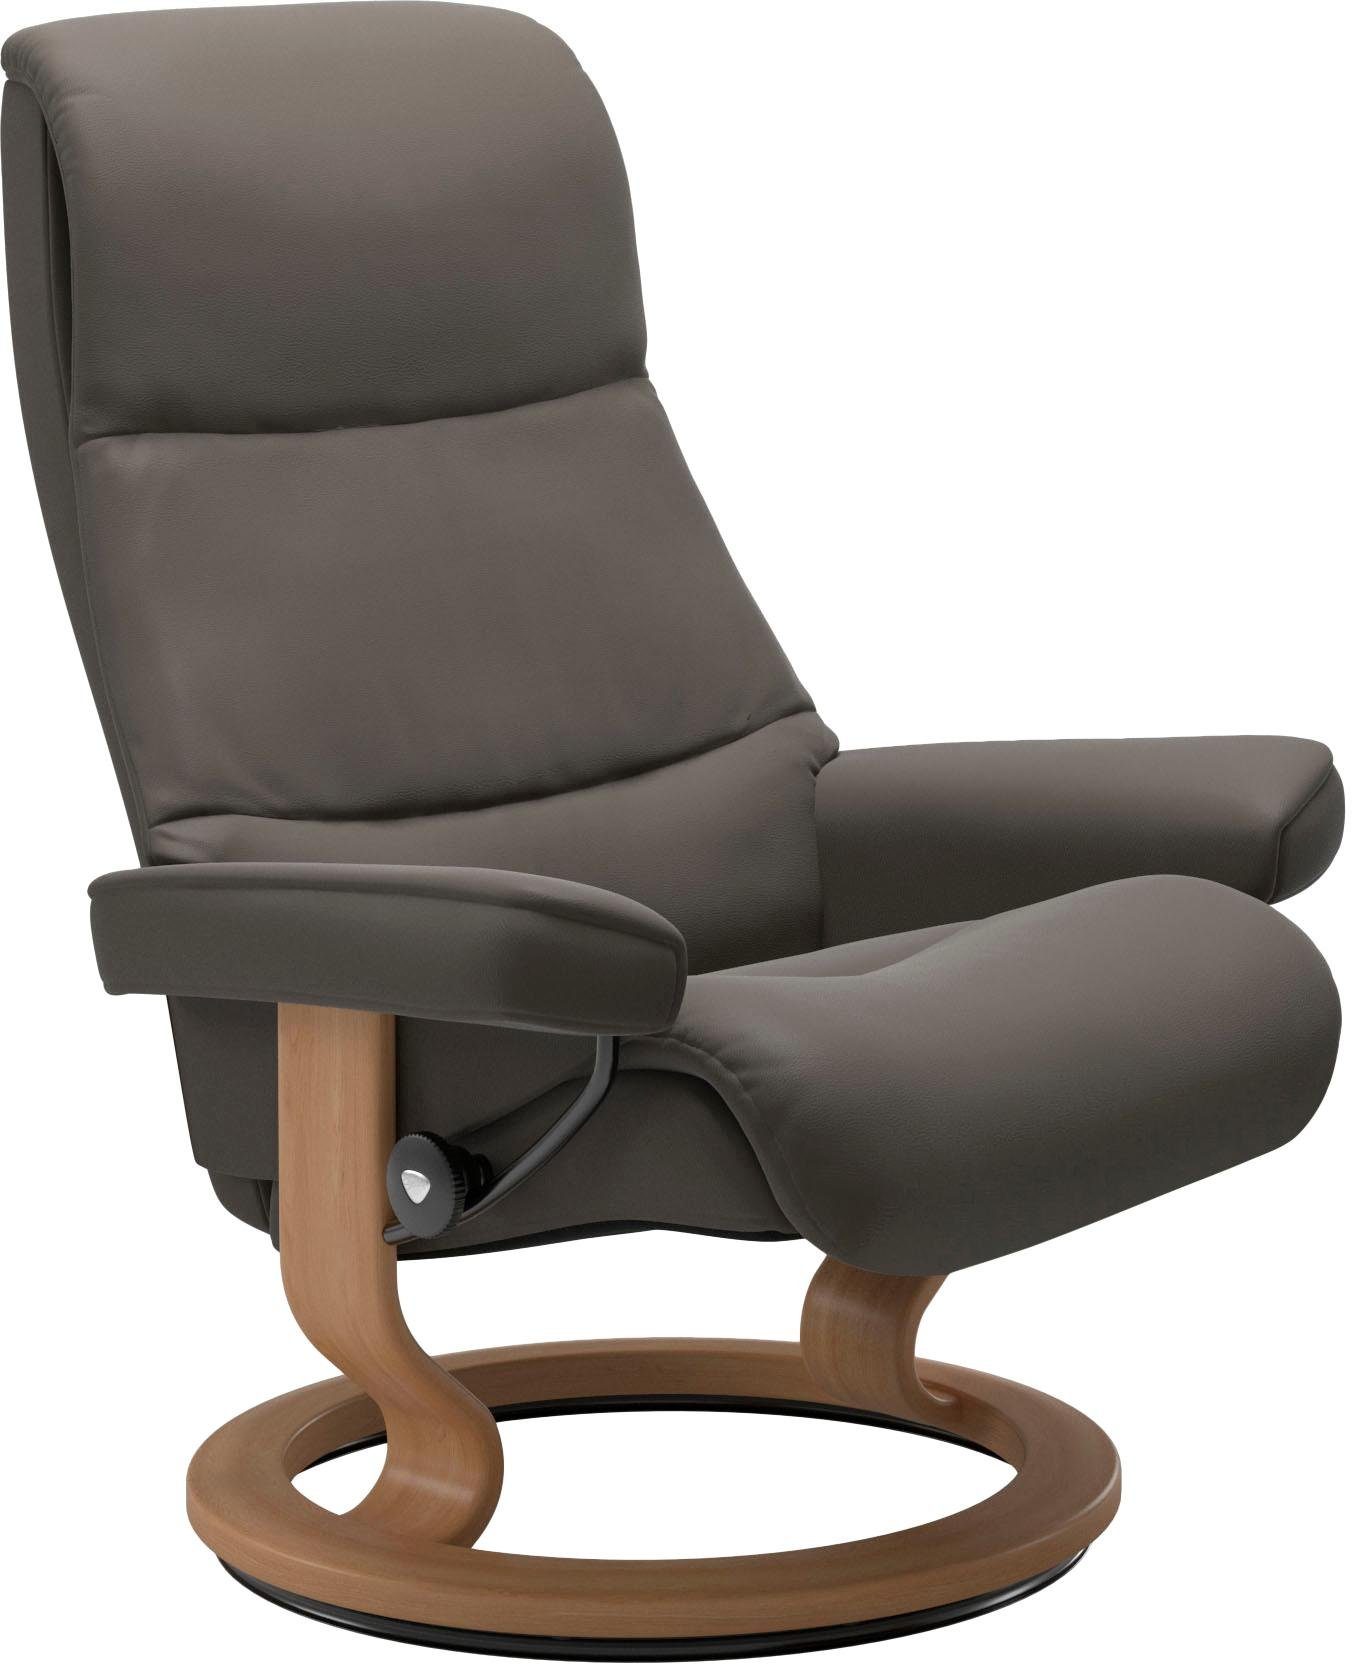 Stressless® Relaxsessel View, mit Classic Base, Größe L,Gestell Eiche | Funktionssessel